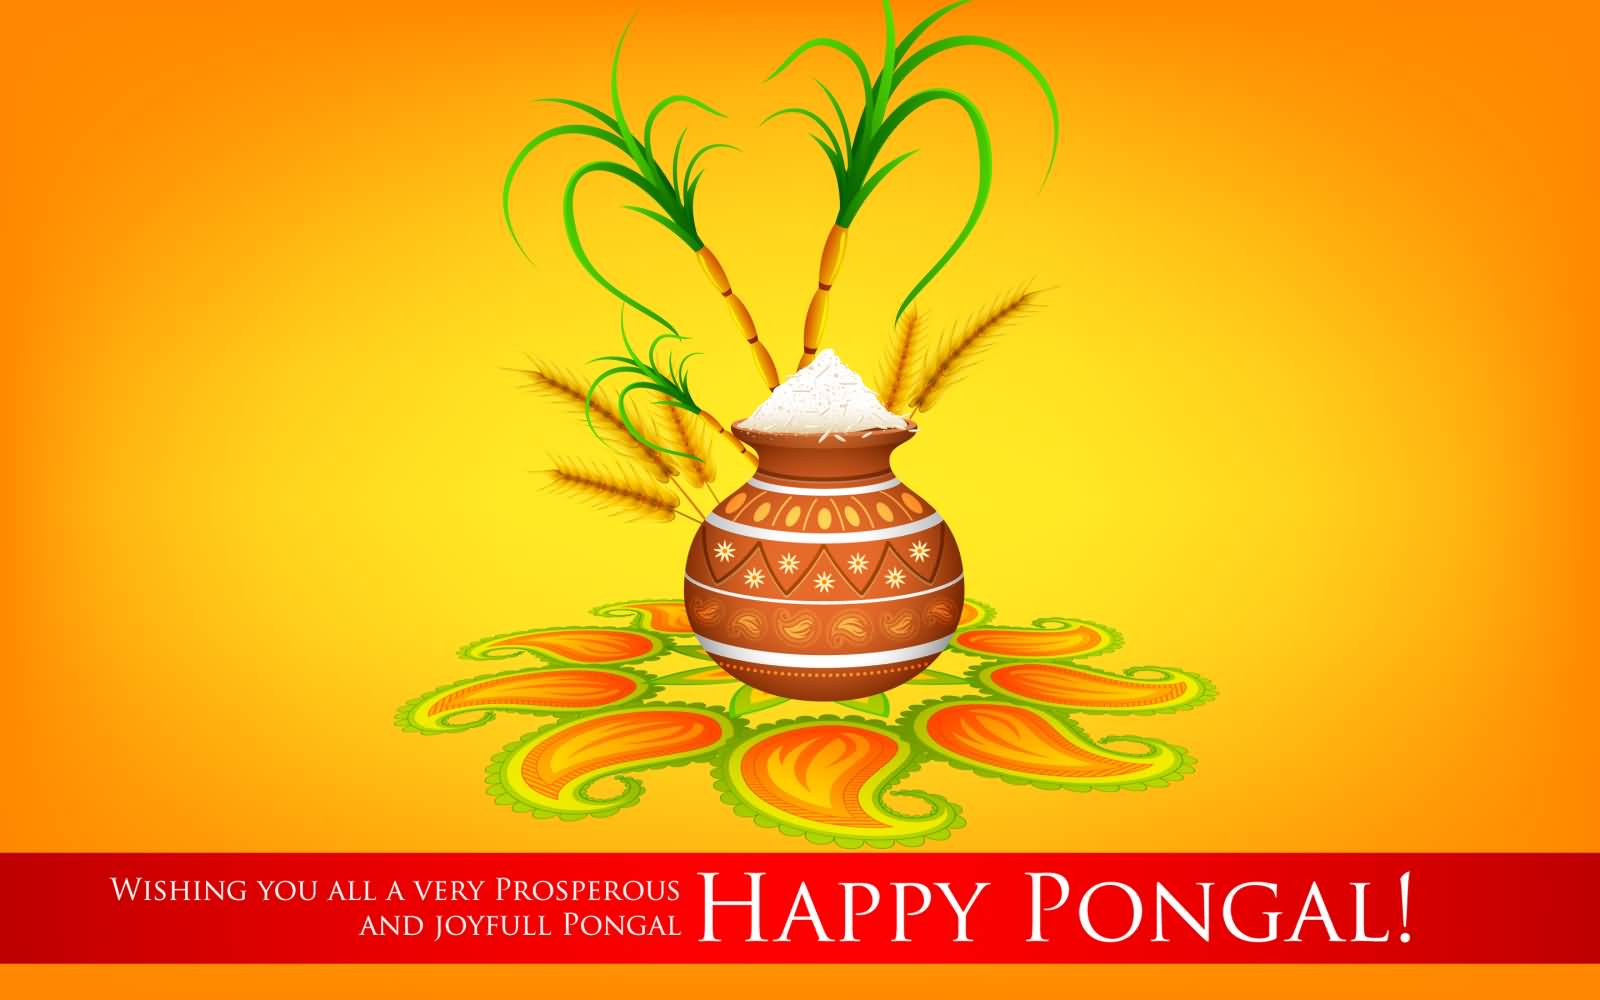 Wishing You All A Very Prosperous And Joyful Pongal